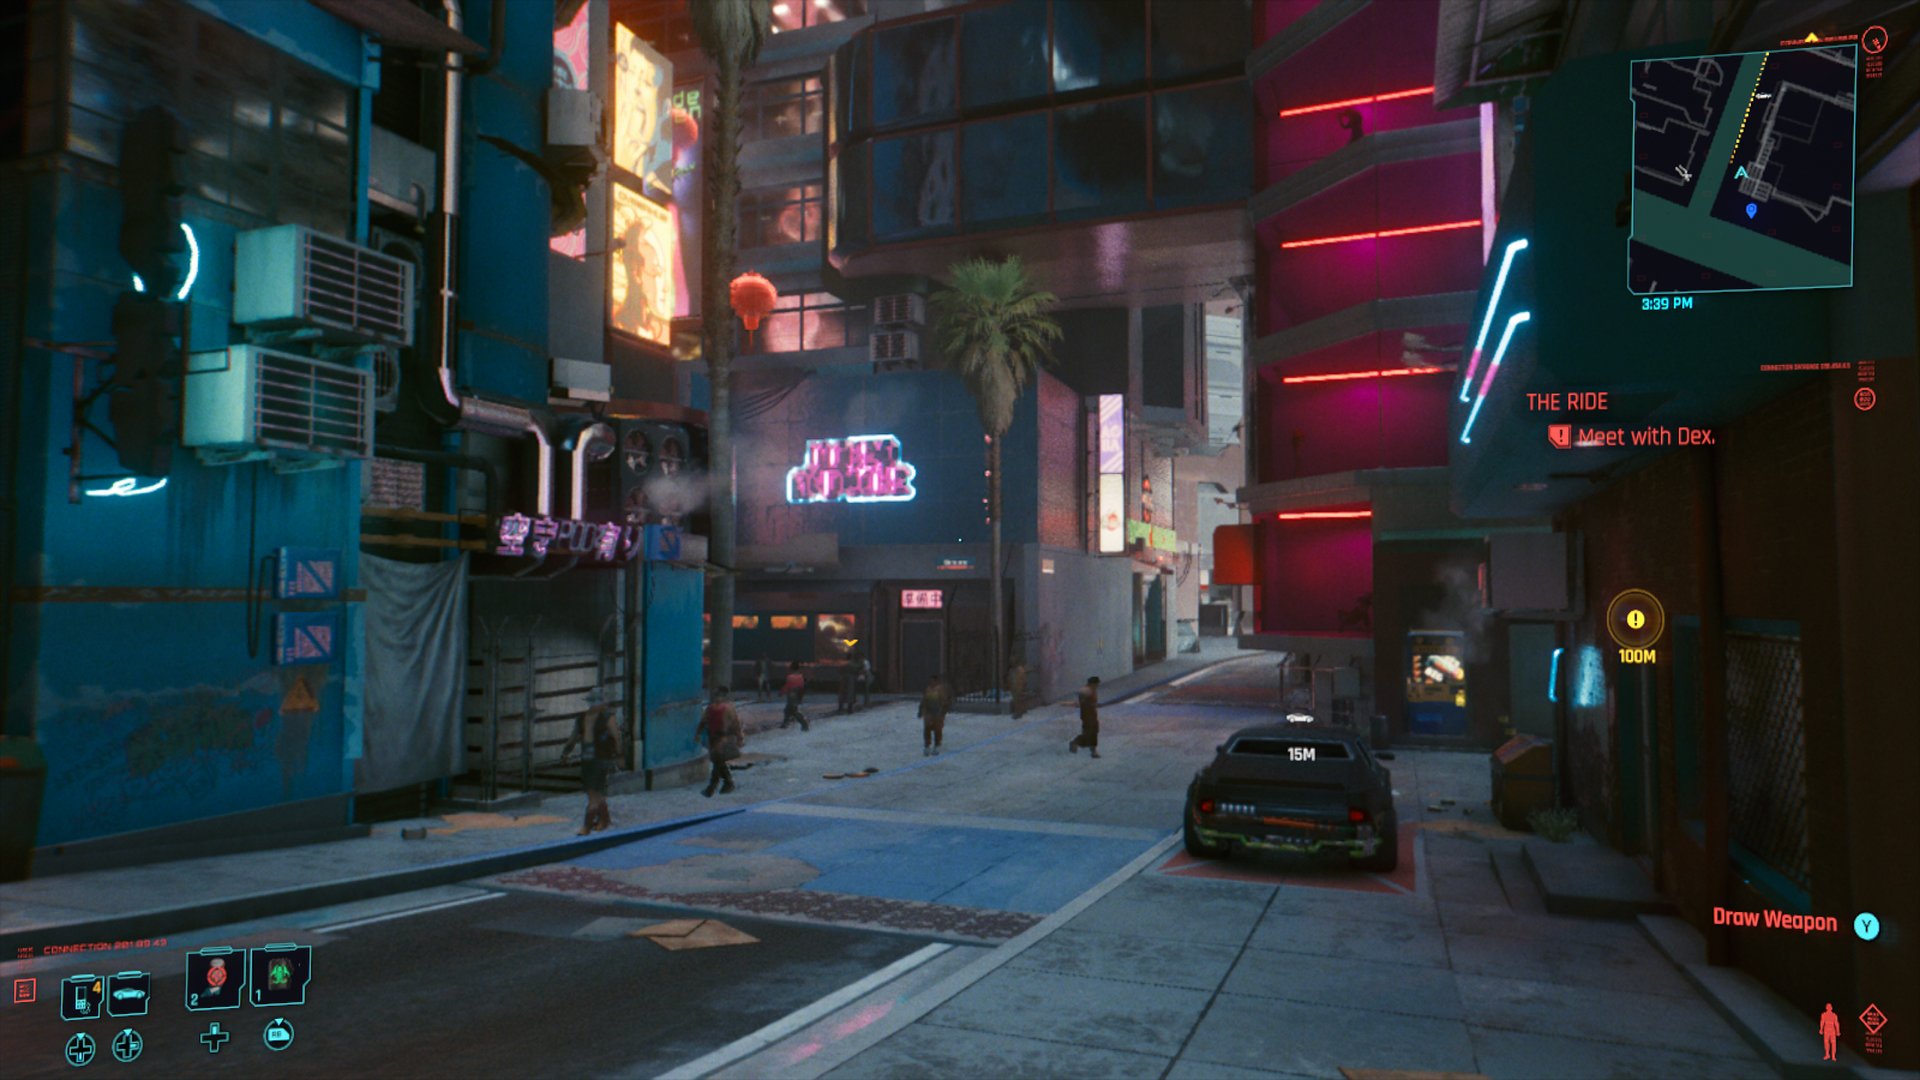 Cyberpunk 2077 Is Looking Rough On PS4 And Xbox One At The Moment